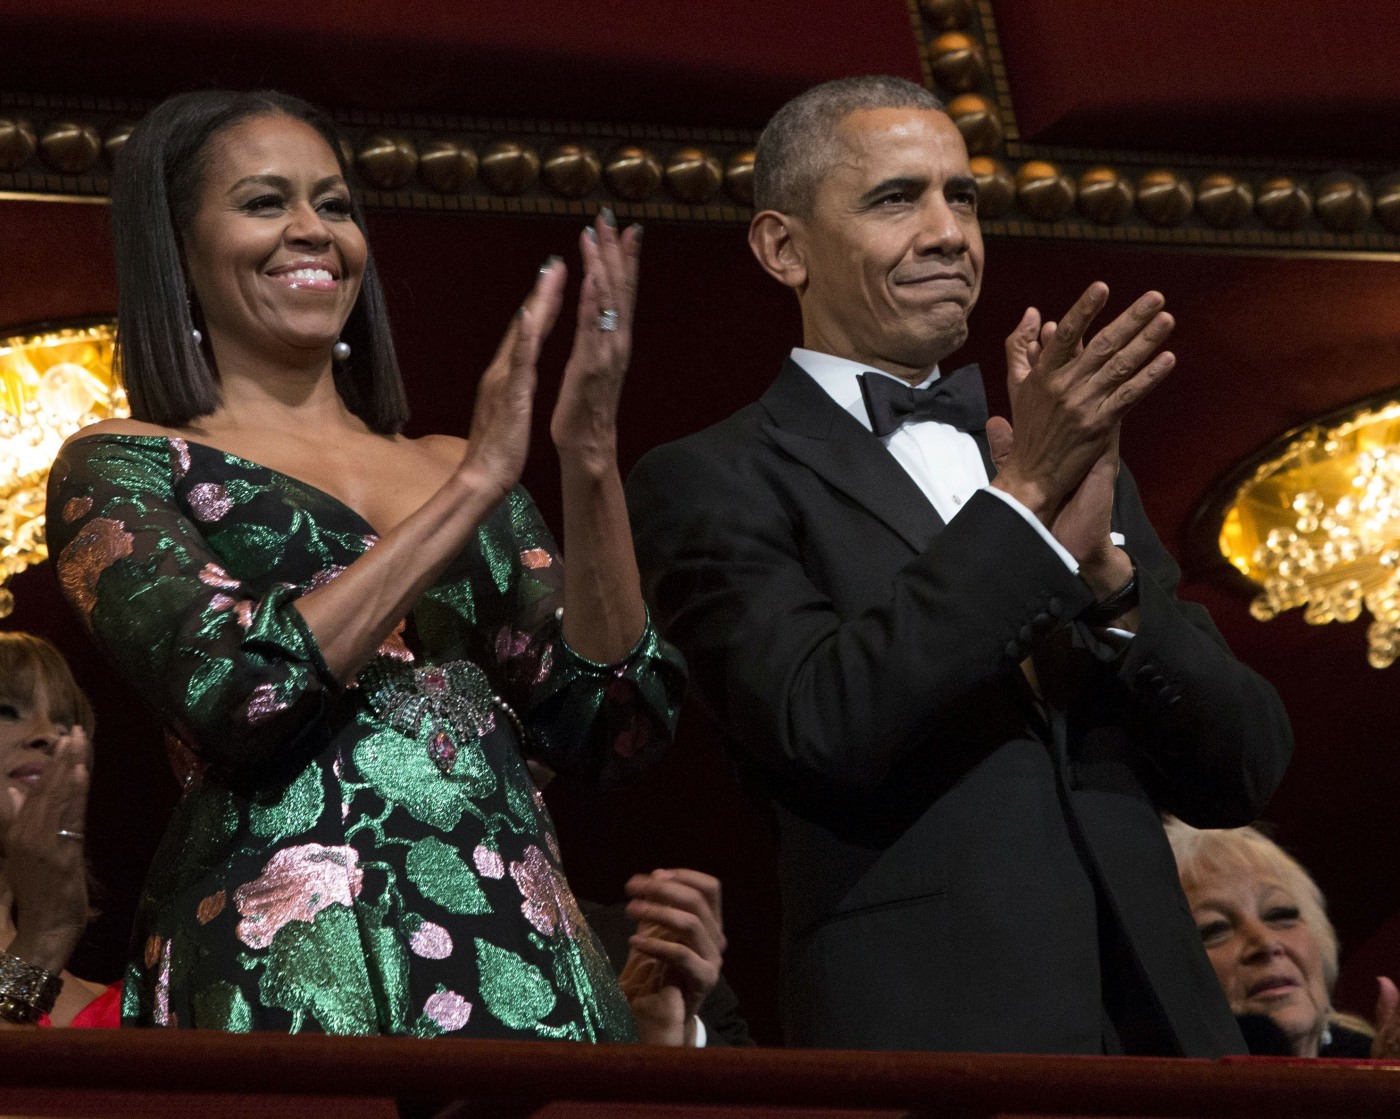 Obama Delivers Remarks at the Kennedy Center Honors Reception